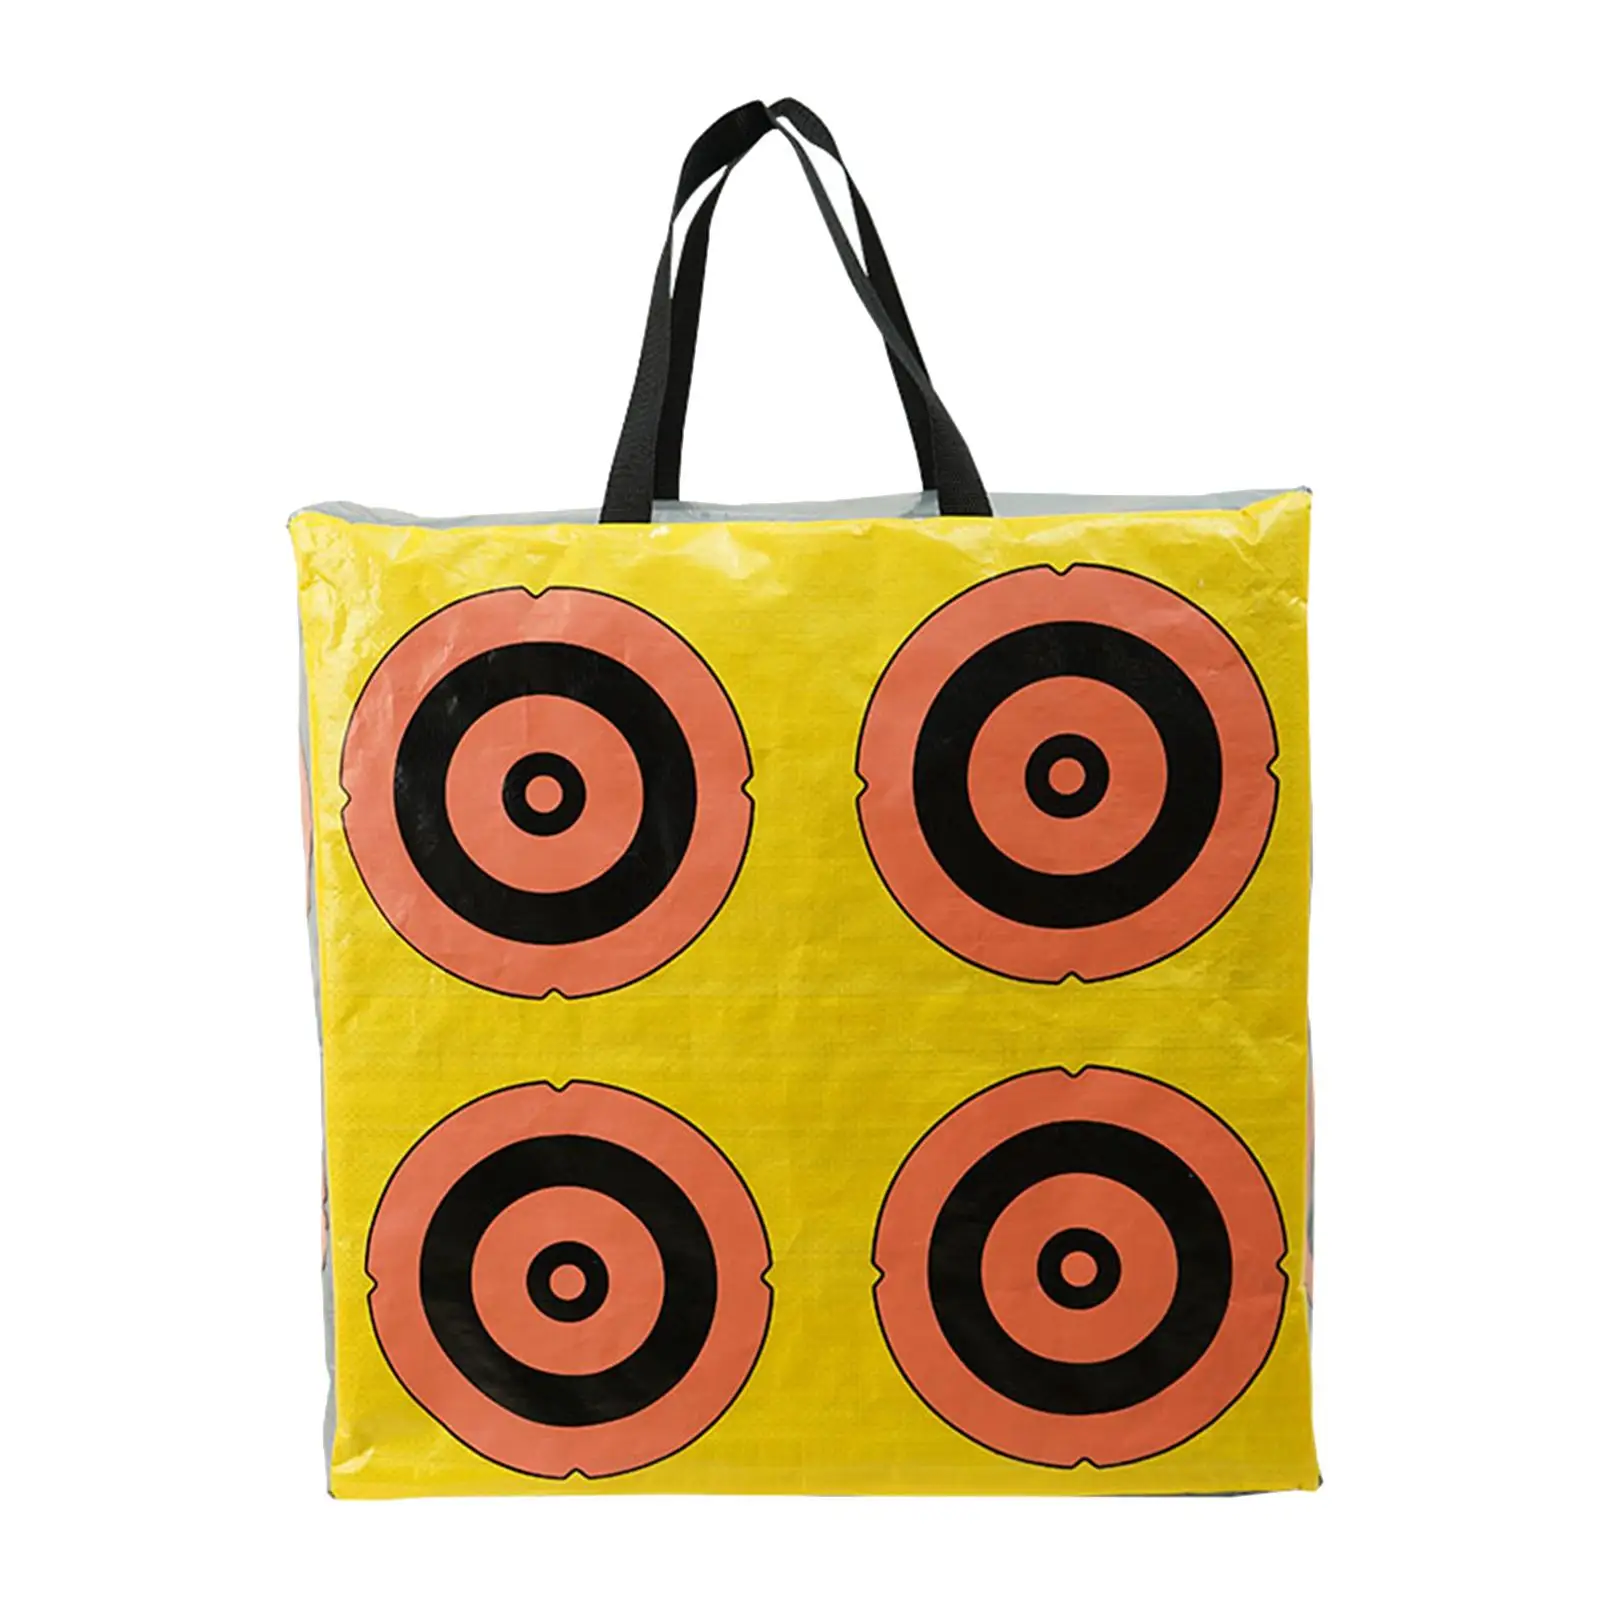 Shooting Targets Garden Exercise Equipment Field Point Bag Archery Target